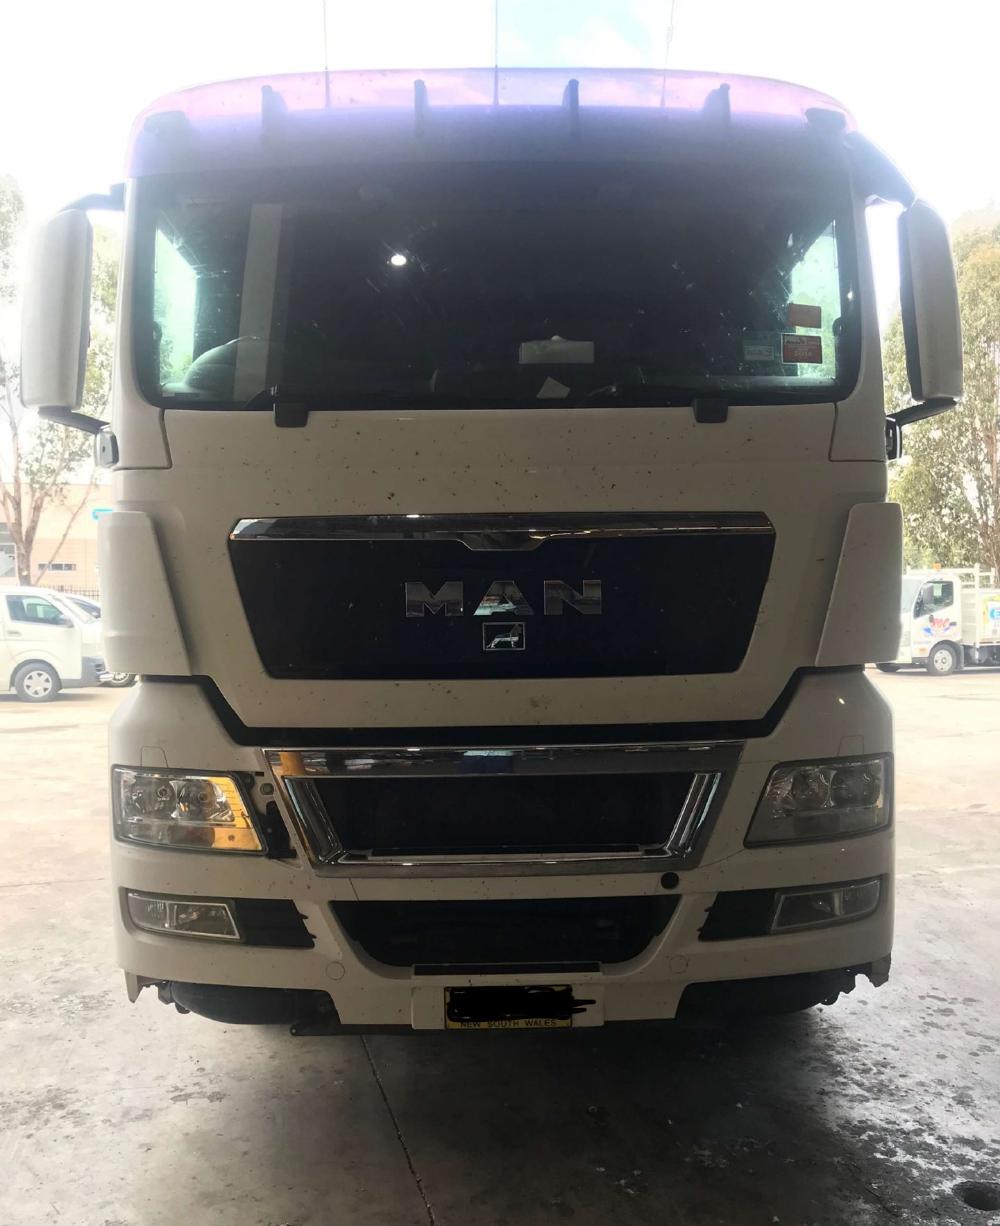 MAN TGX26 PMV 2009 Prime Mover WMA30XZZX9W For Sale Truck Funding Solutions 180088LOAN Australia wide 24x7